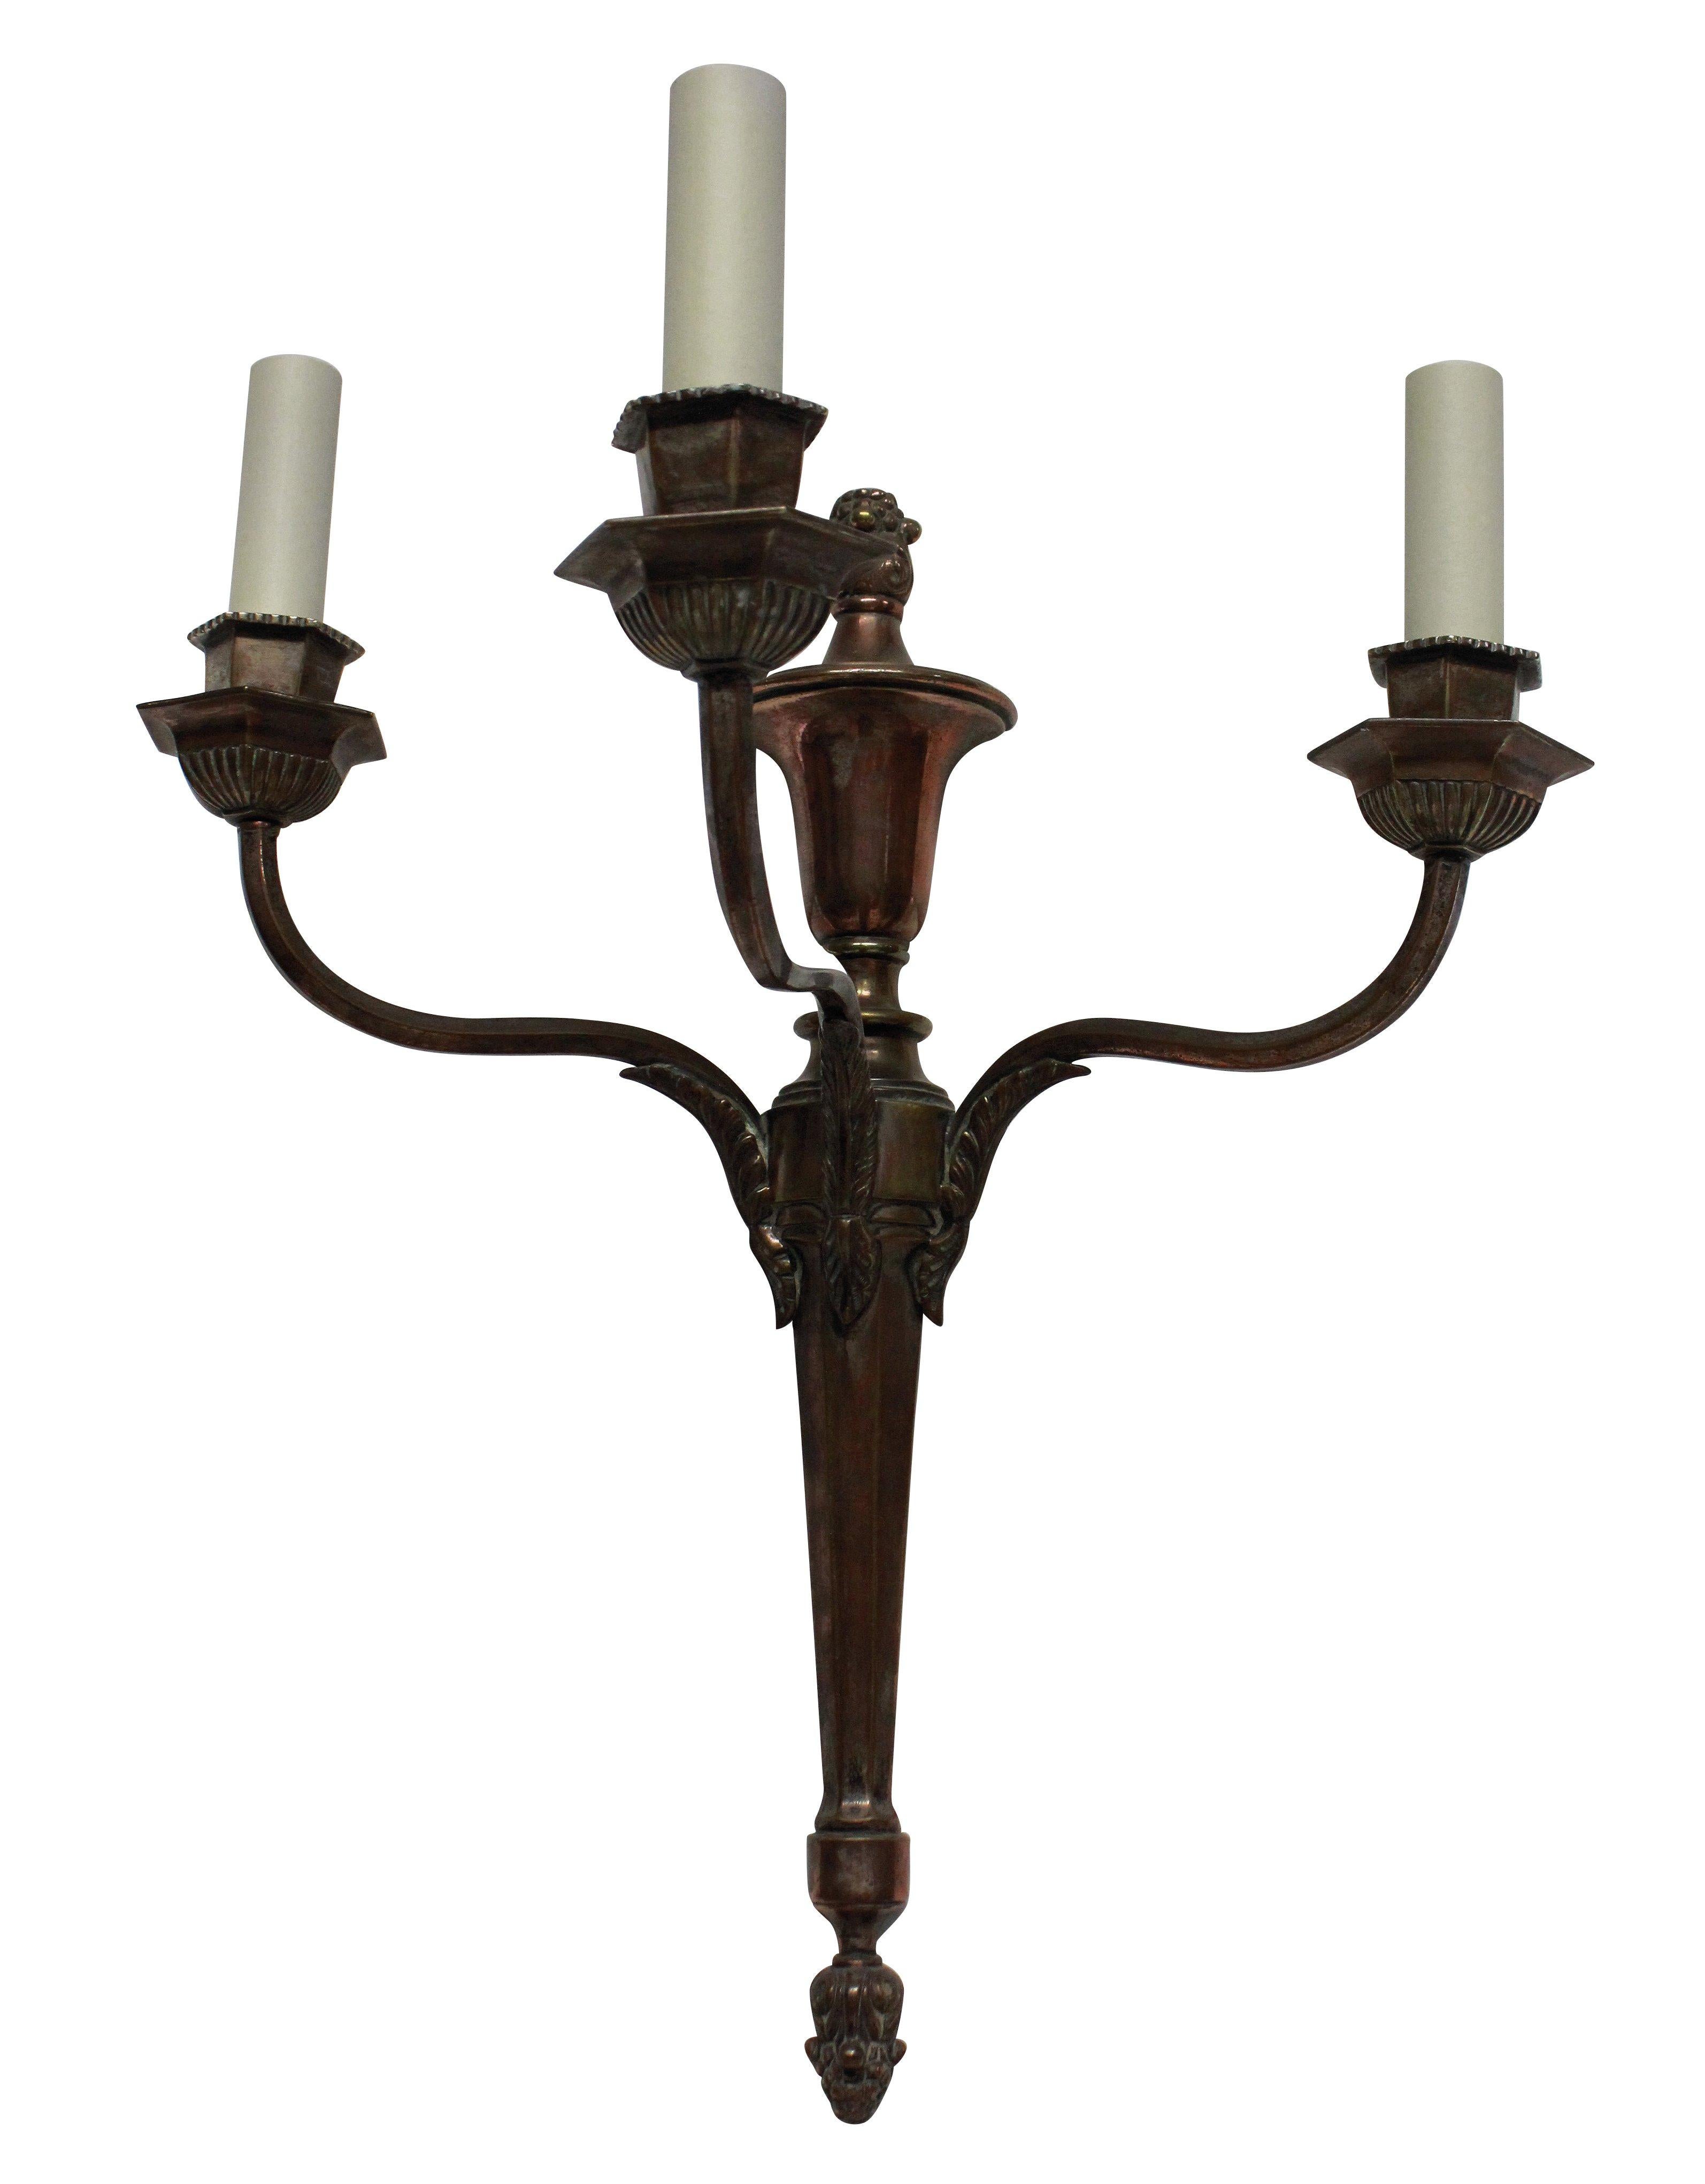 A set of four English neoclassical three-branch wall sconces in an un-restored bronzed finish.